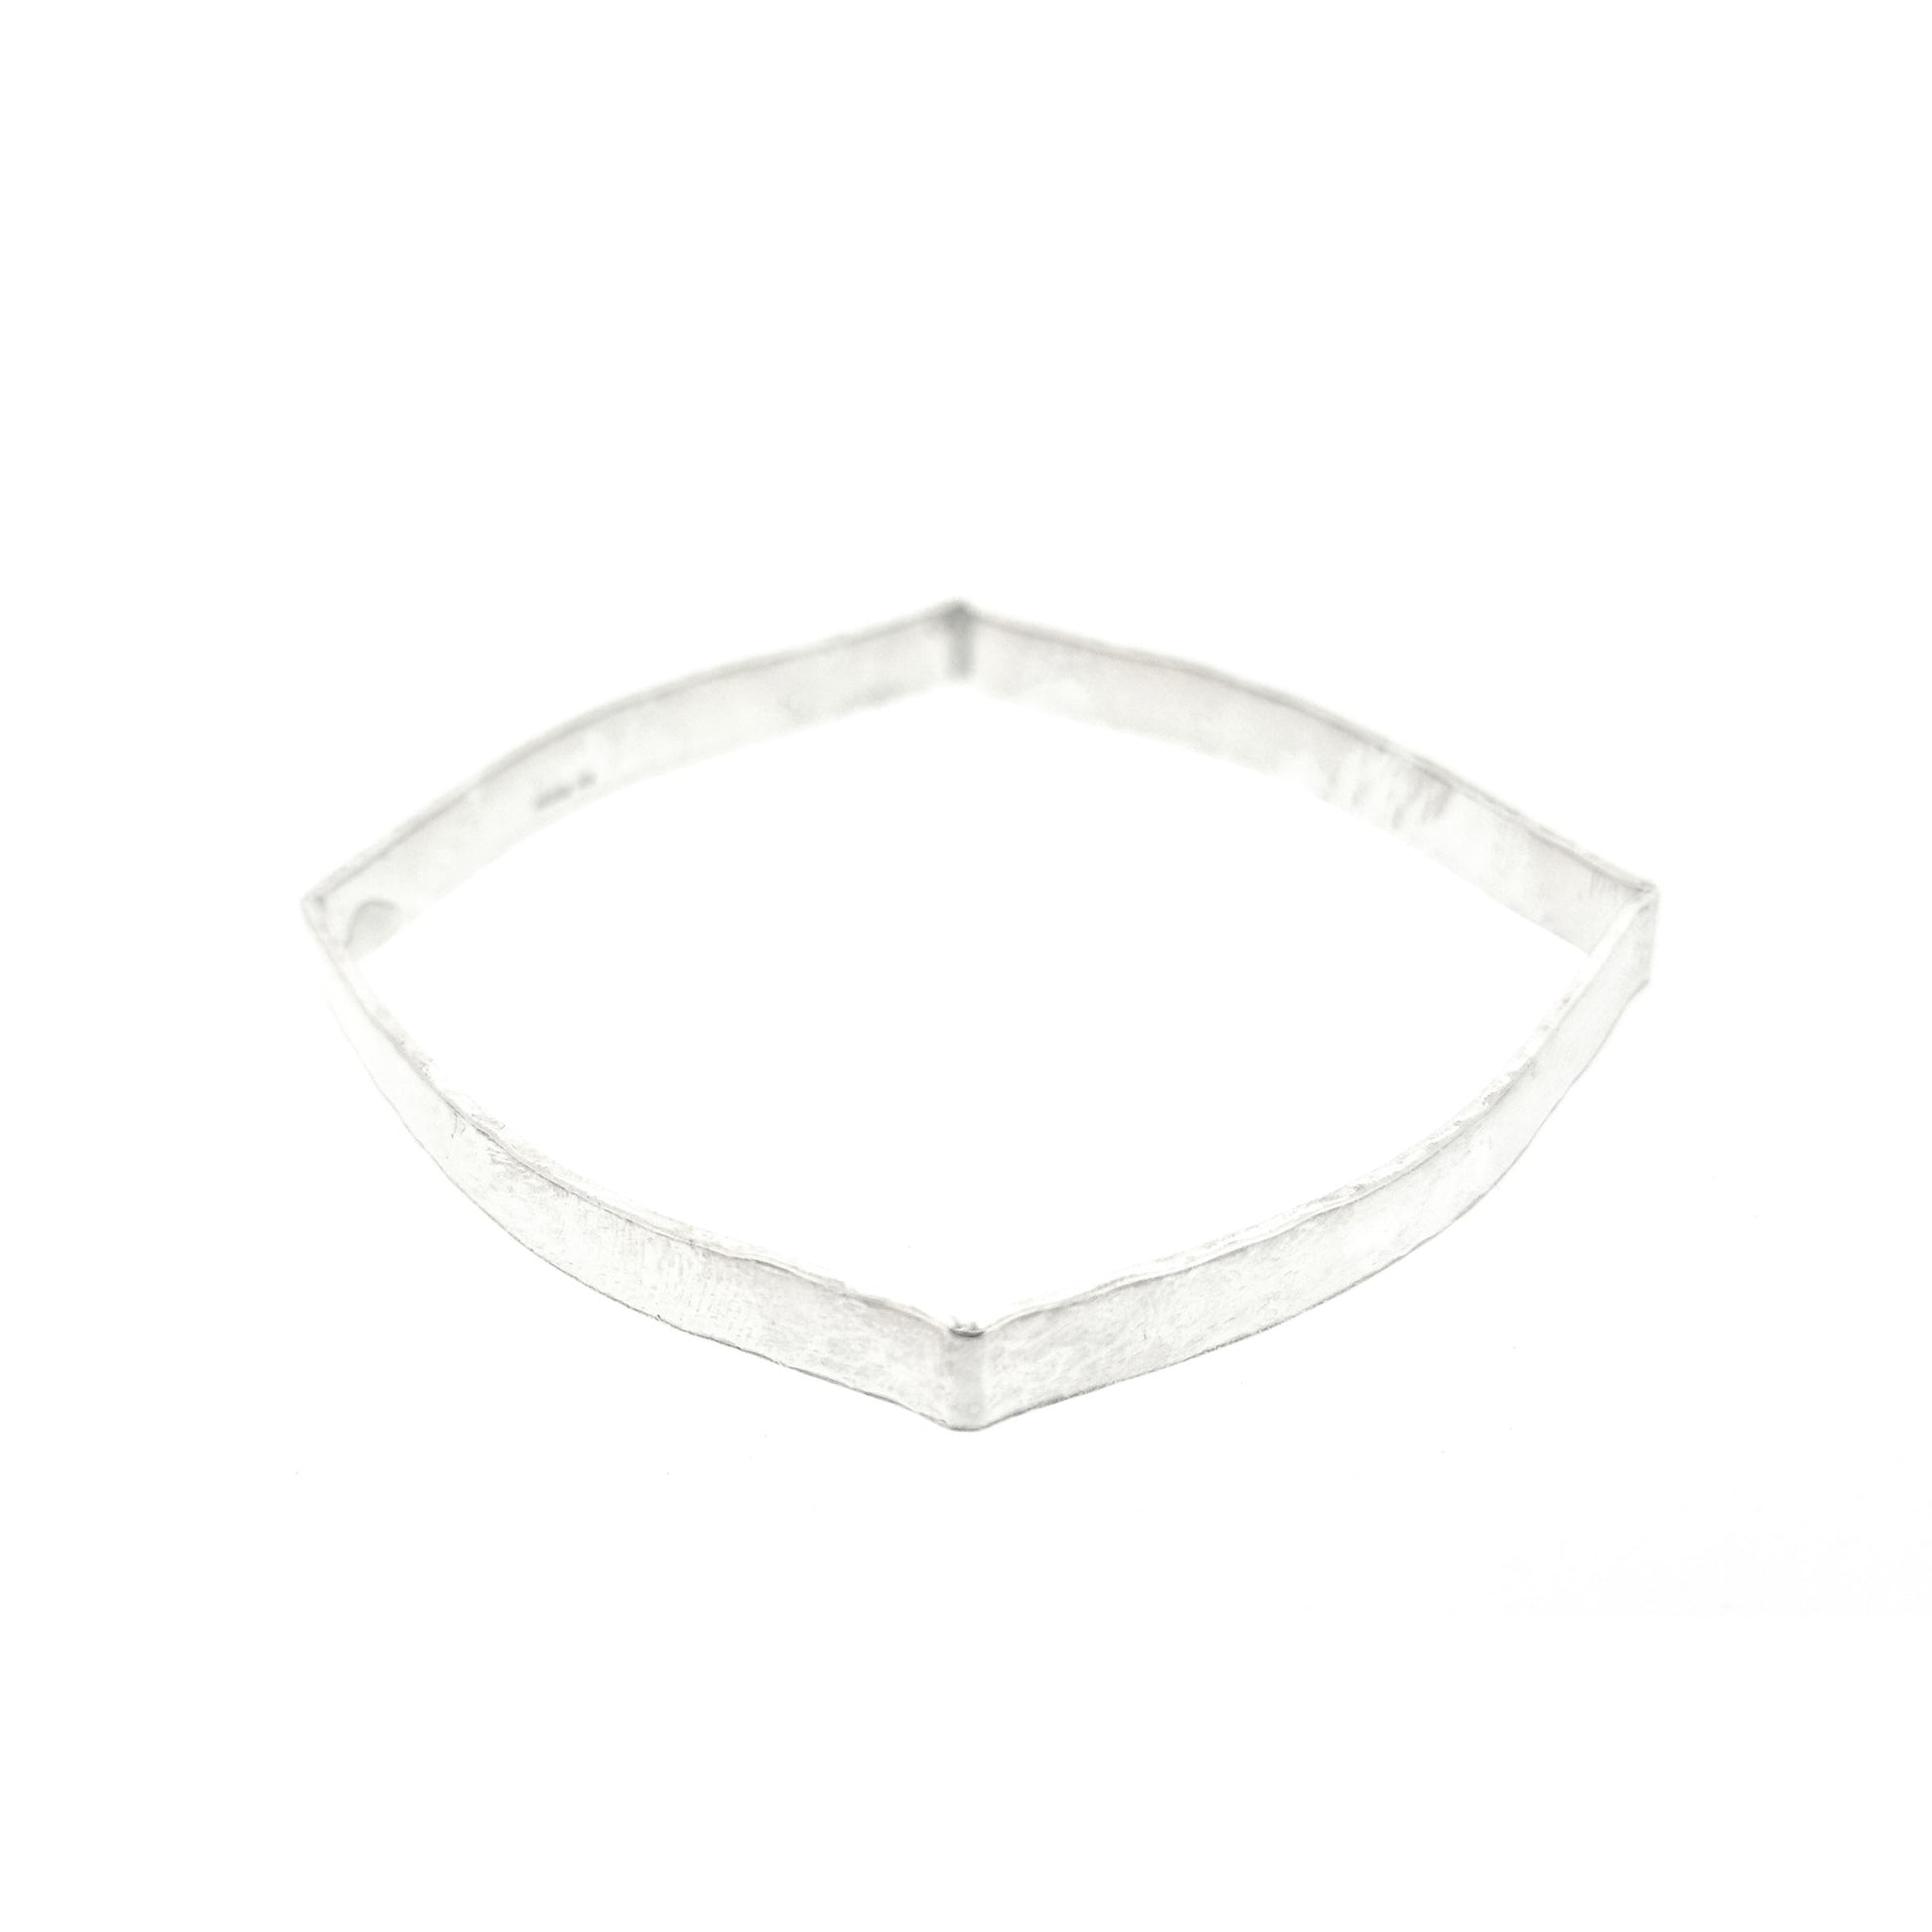 Silver hammered bangle with a round and square profile.